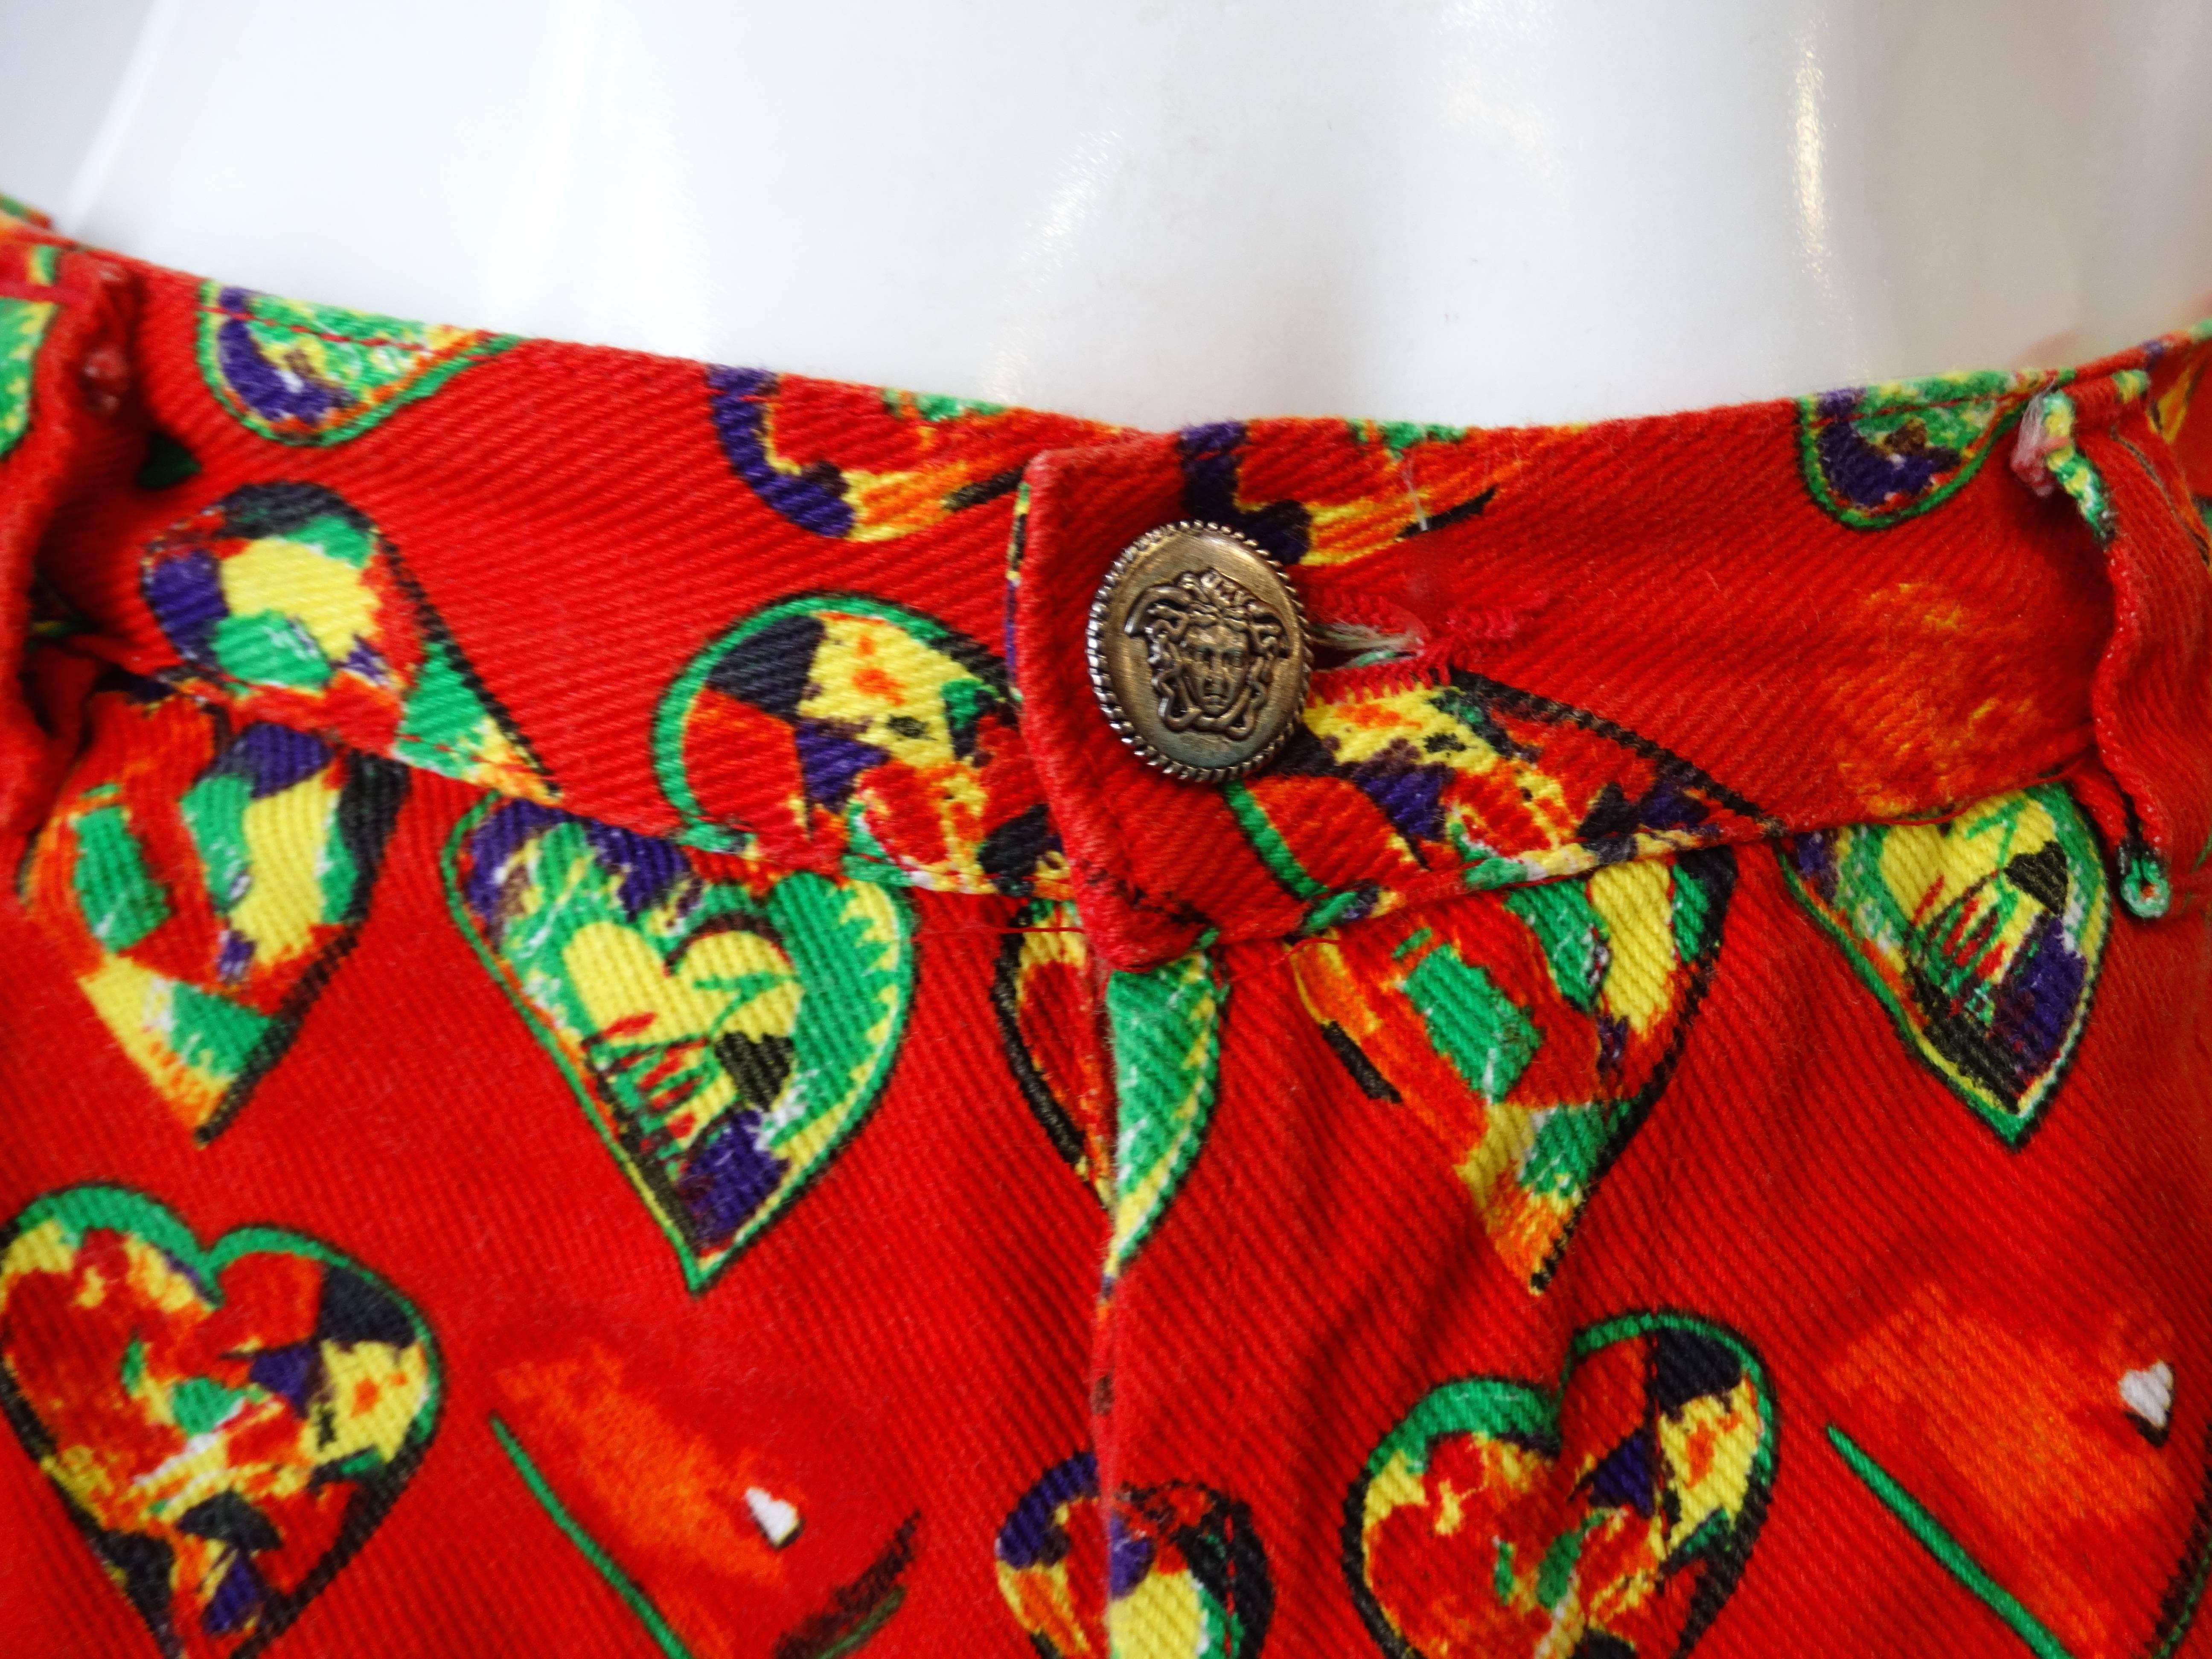 Fall in love with this incredible pair of Versace heart jeans circa 1997! Soft cotton denim material printed with bold red, green and yellow heart pattern! Hidden button fly opens up to reveal a set of silver metal medusa head buttons! Pockets at